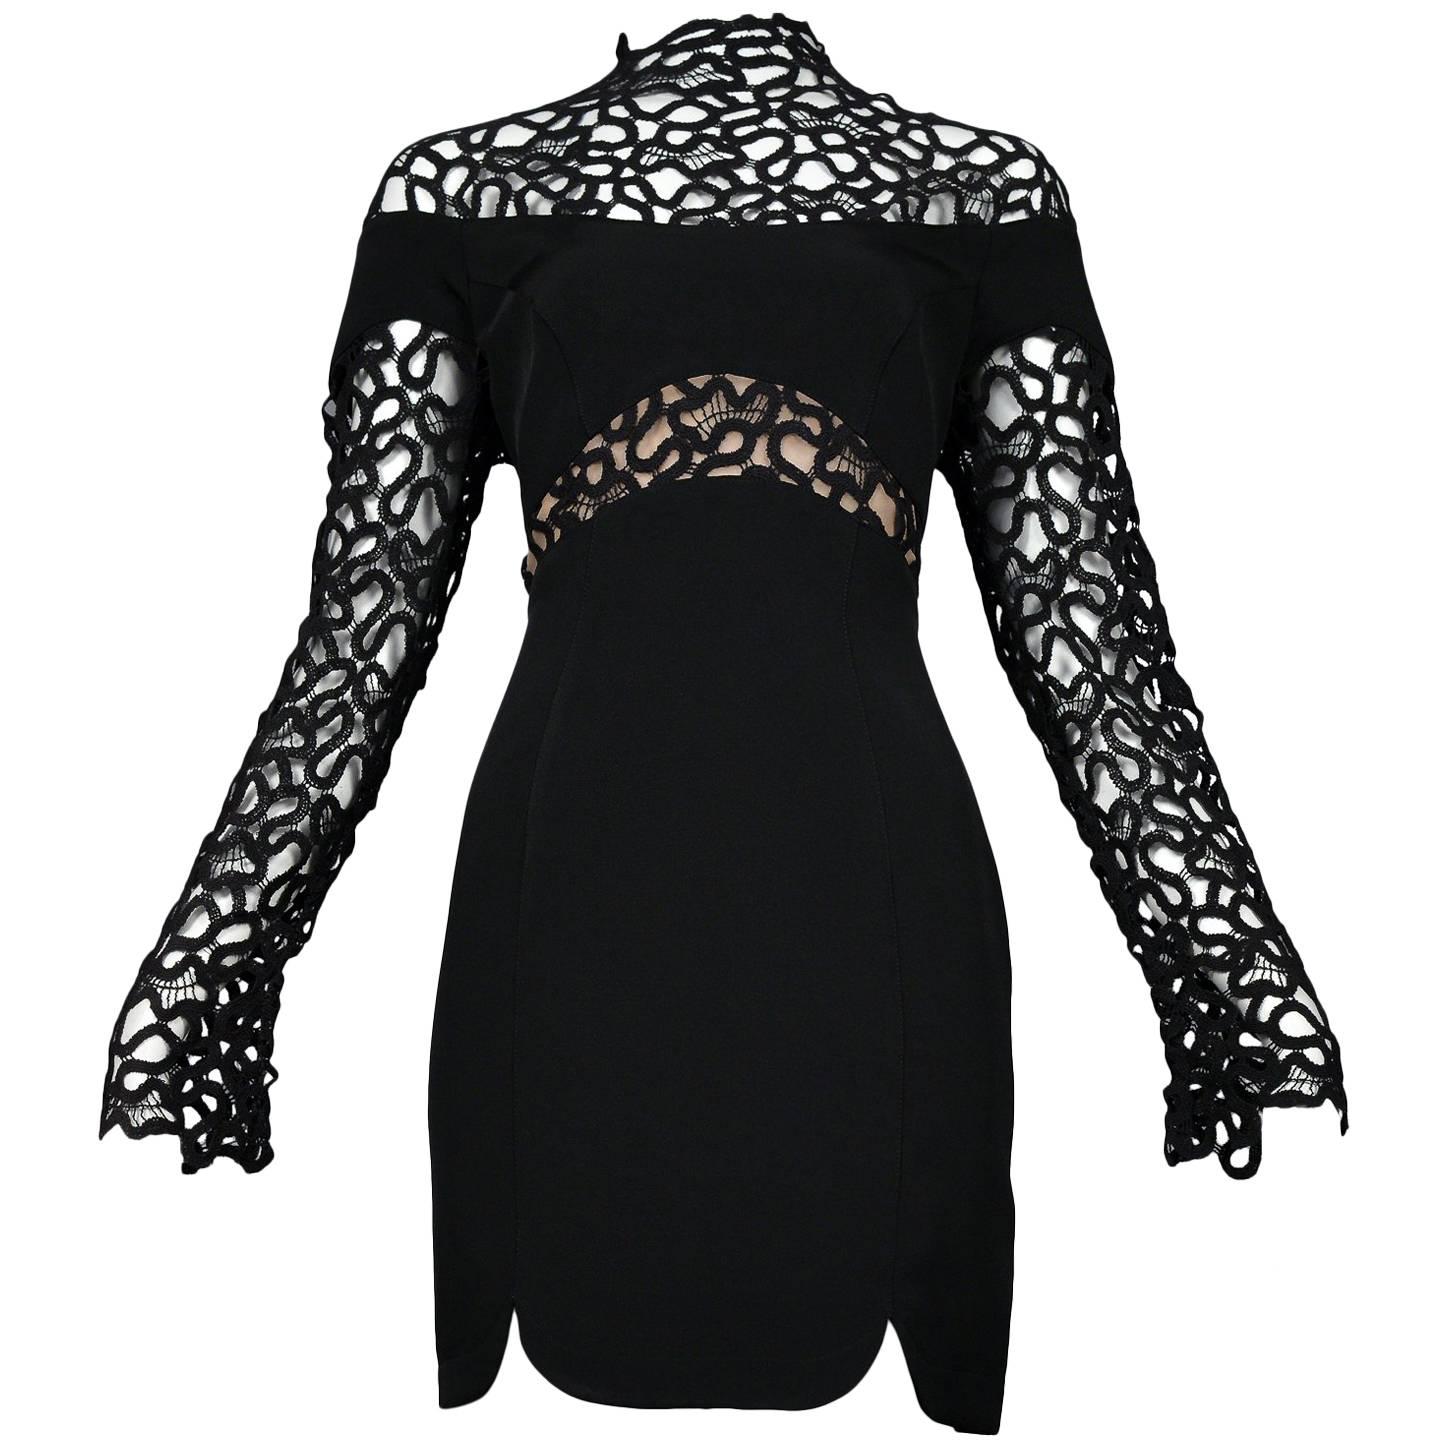 Thierry Mugler Black Lace & Insets Long Sleeve Mini Cocktail Dress 